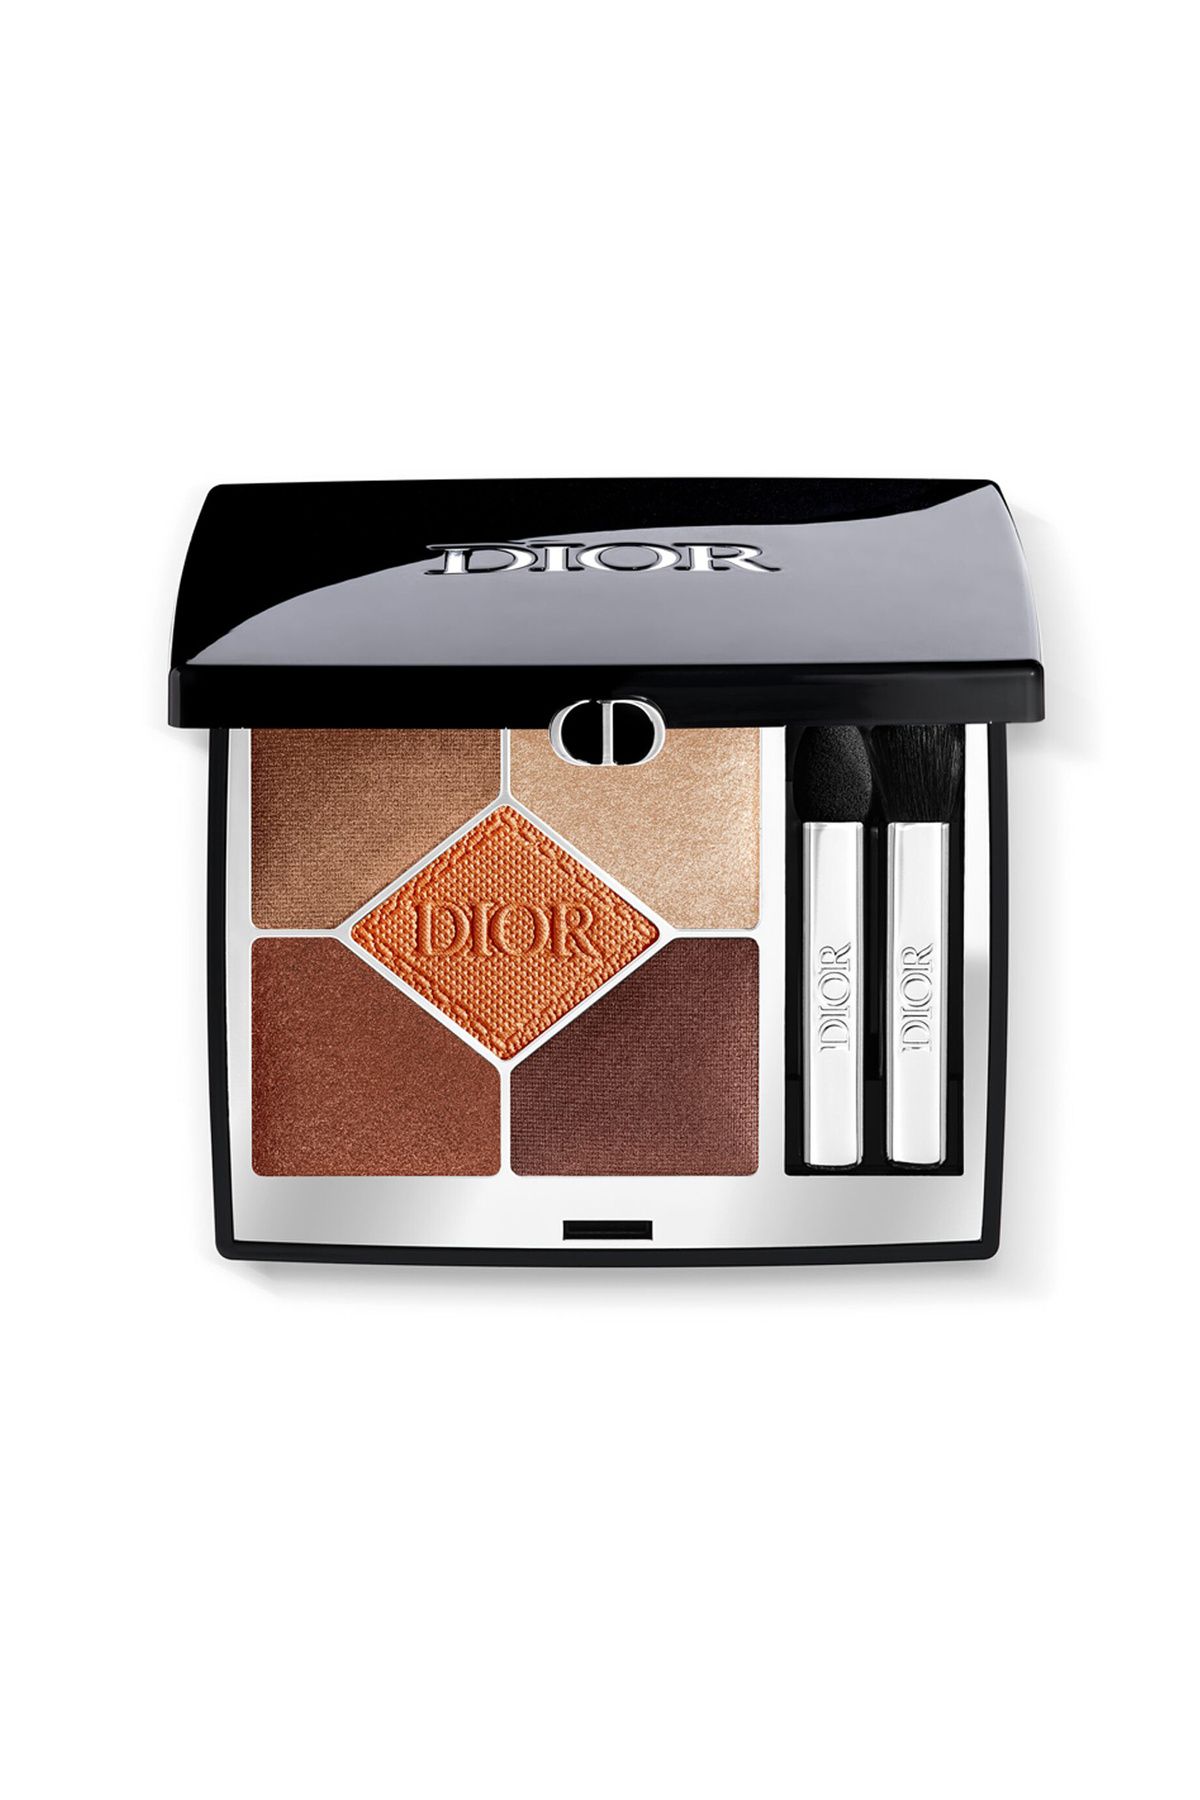 Dior DİORSHOW INTENSELY PİGMENTED EYESHADOW - 439 COPPER DEMBA2599